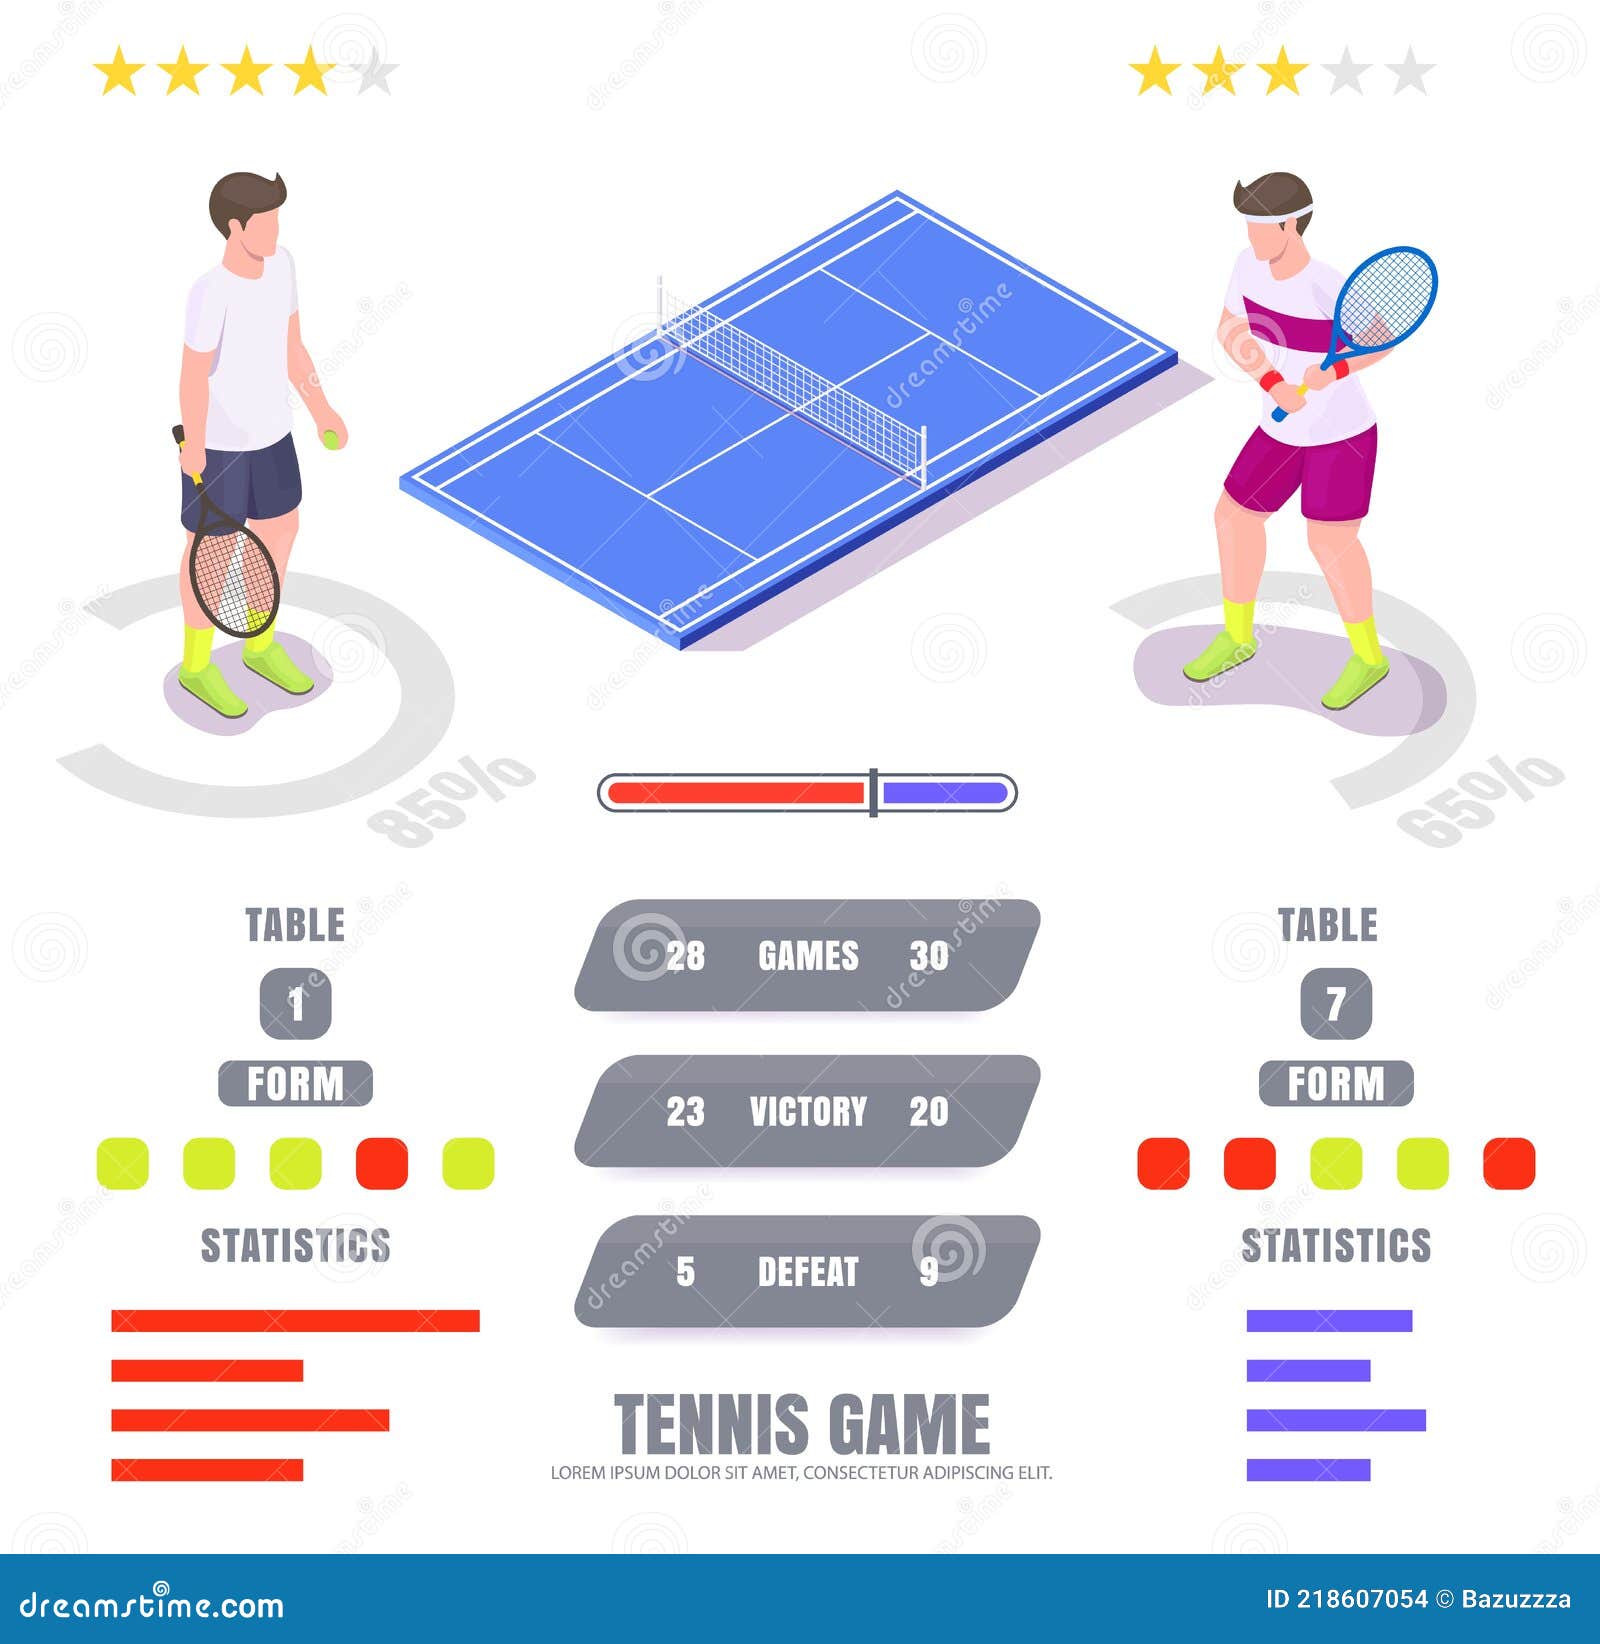 Tennis Game Statistics, Ratings, Vector Isometric Infographic